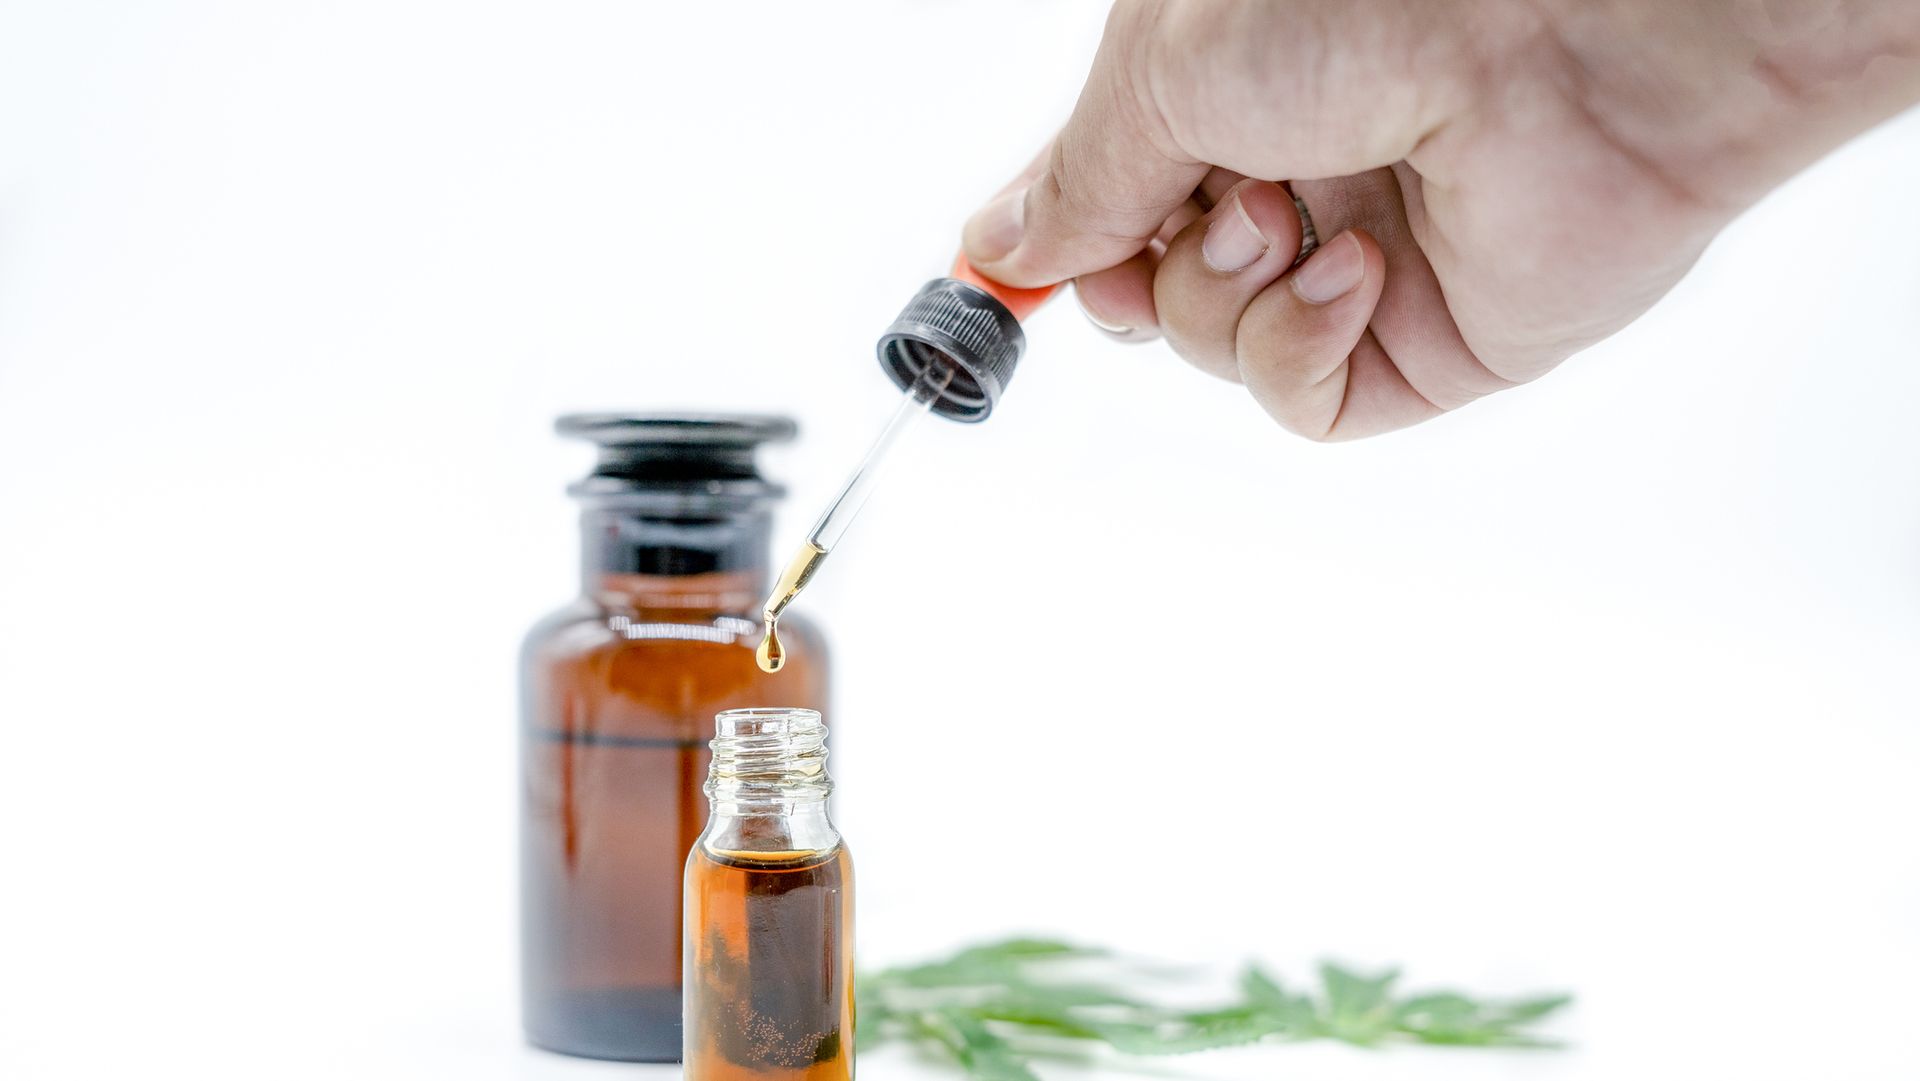 Hand holding bottle of Cannabis oil in, natural herb, medical marijuana concept, CBD cannabis OIL. hemp product, close up,